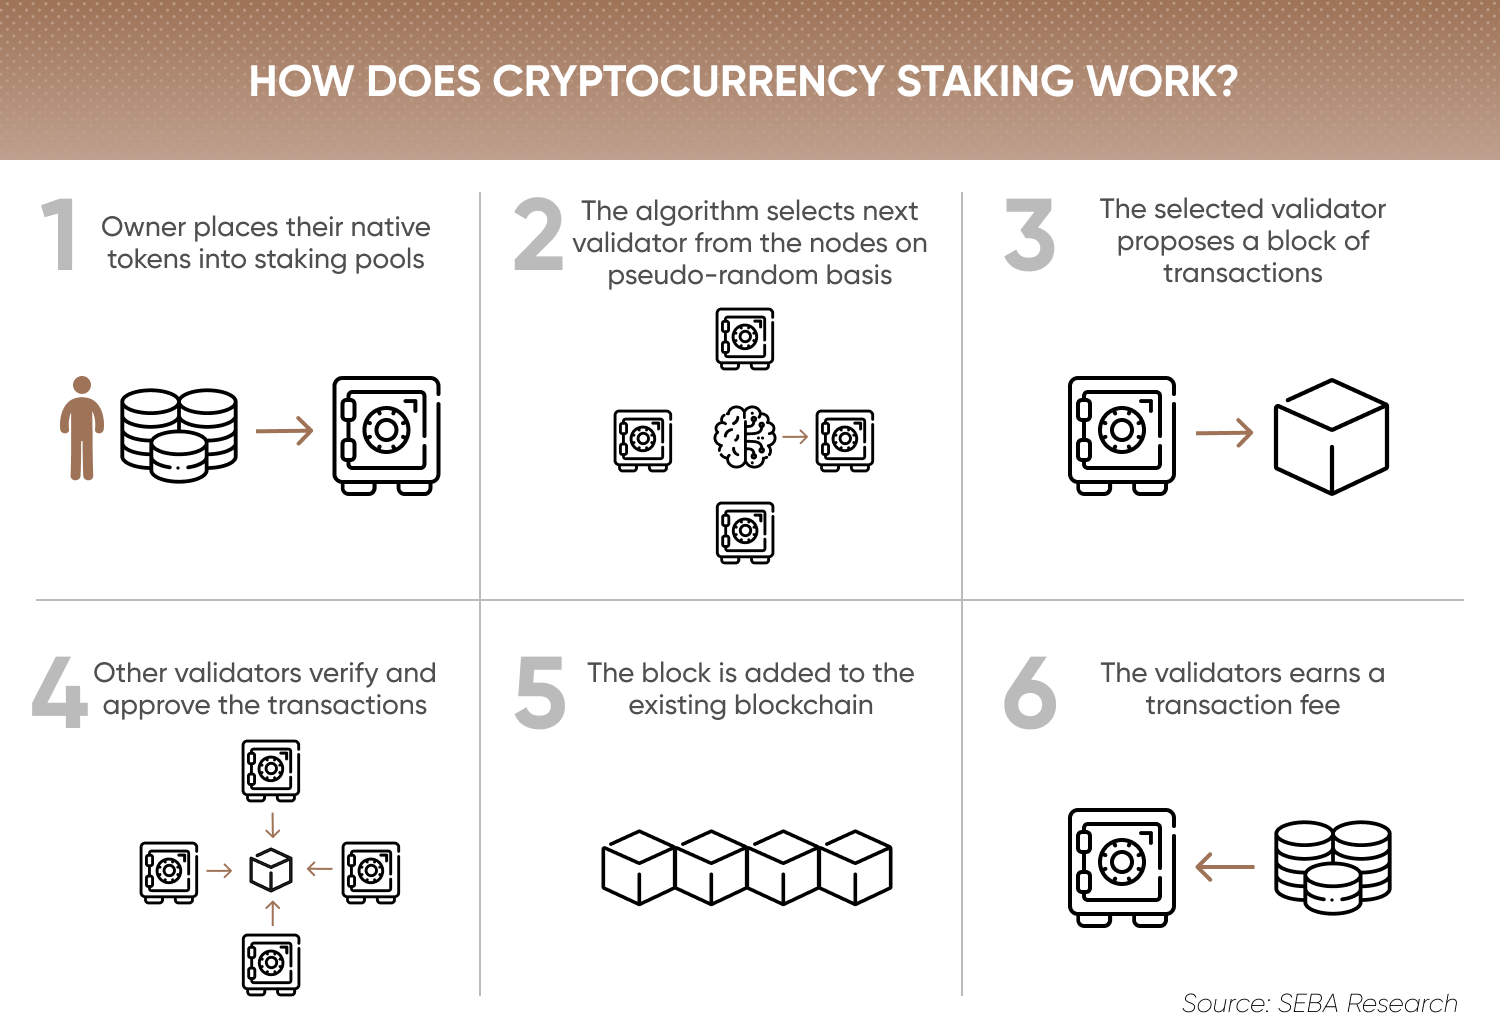 NOW DOES CRYPTOCURRENCY STAKING WORK